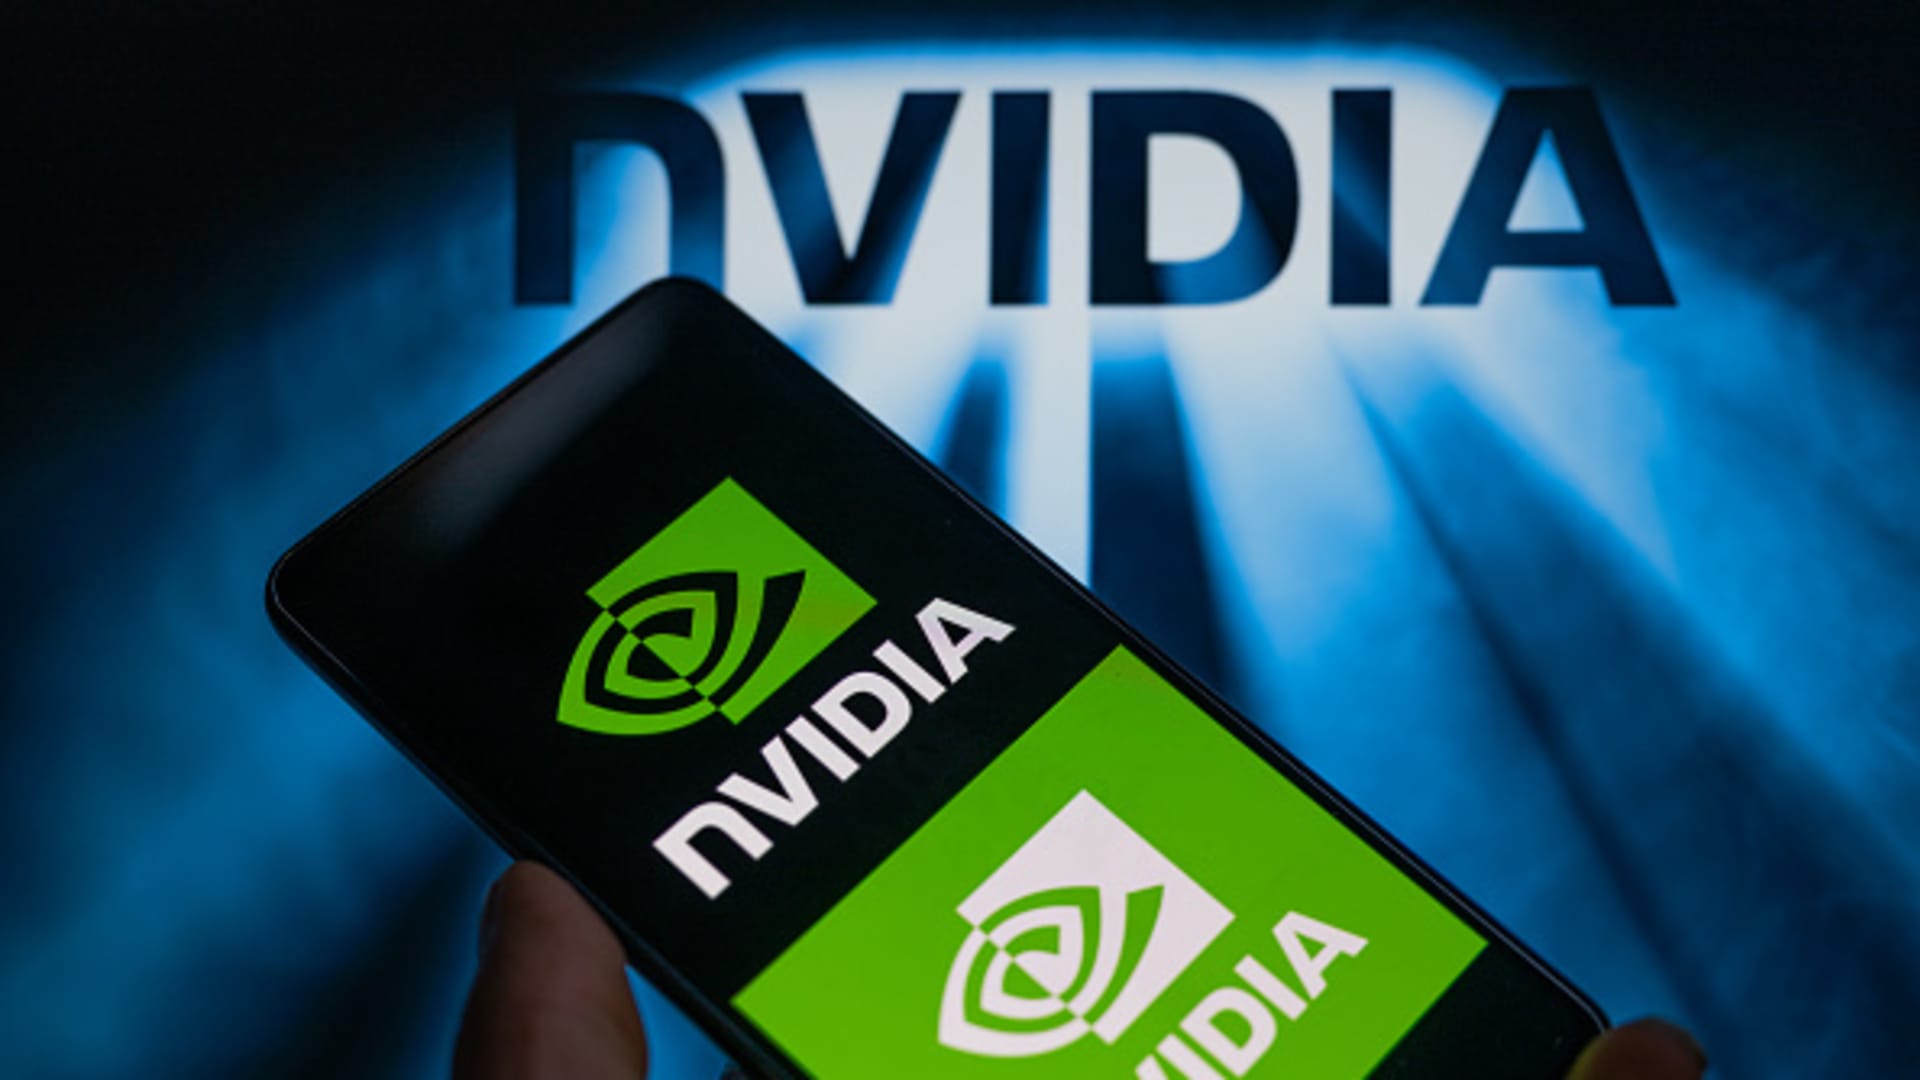 Nvidia’s Data Center business is booming, up more than 400% since last year to $18.4 billion in fourth-quarter sales